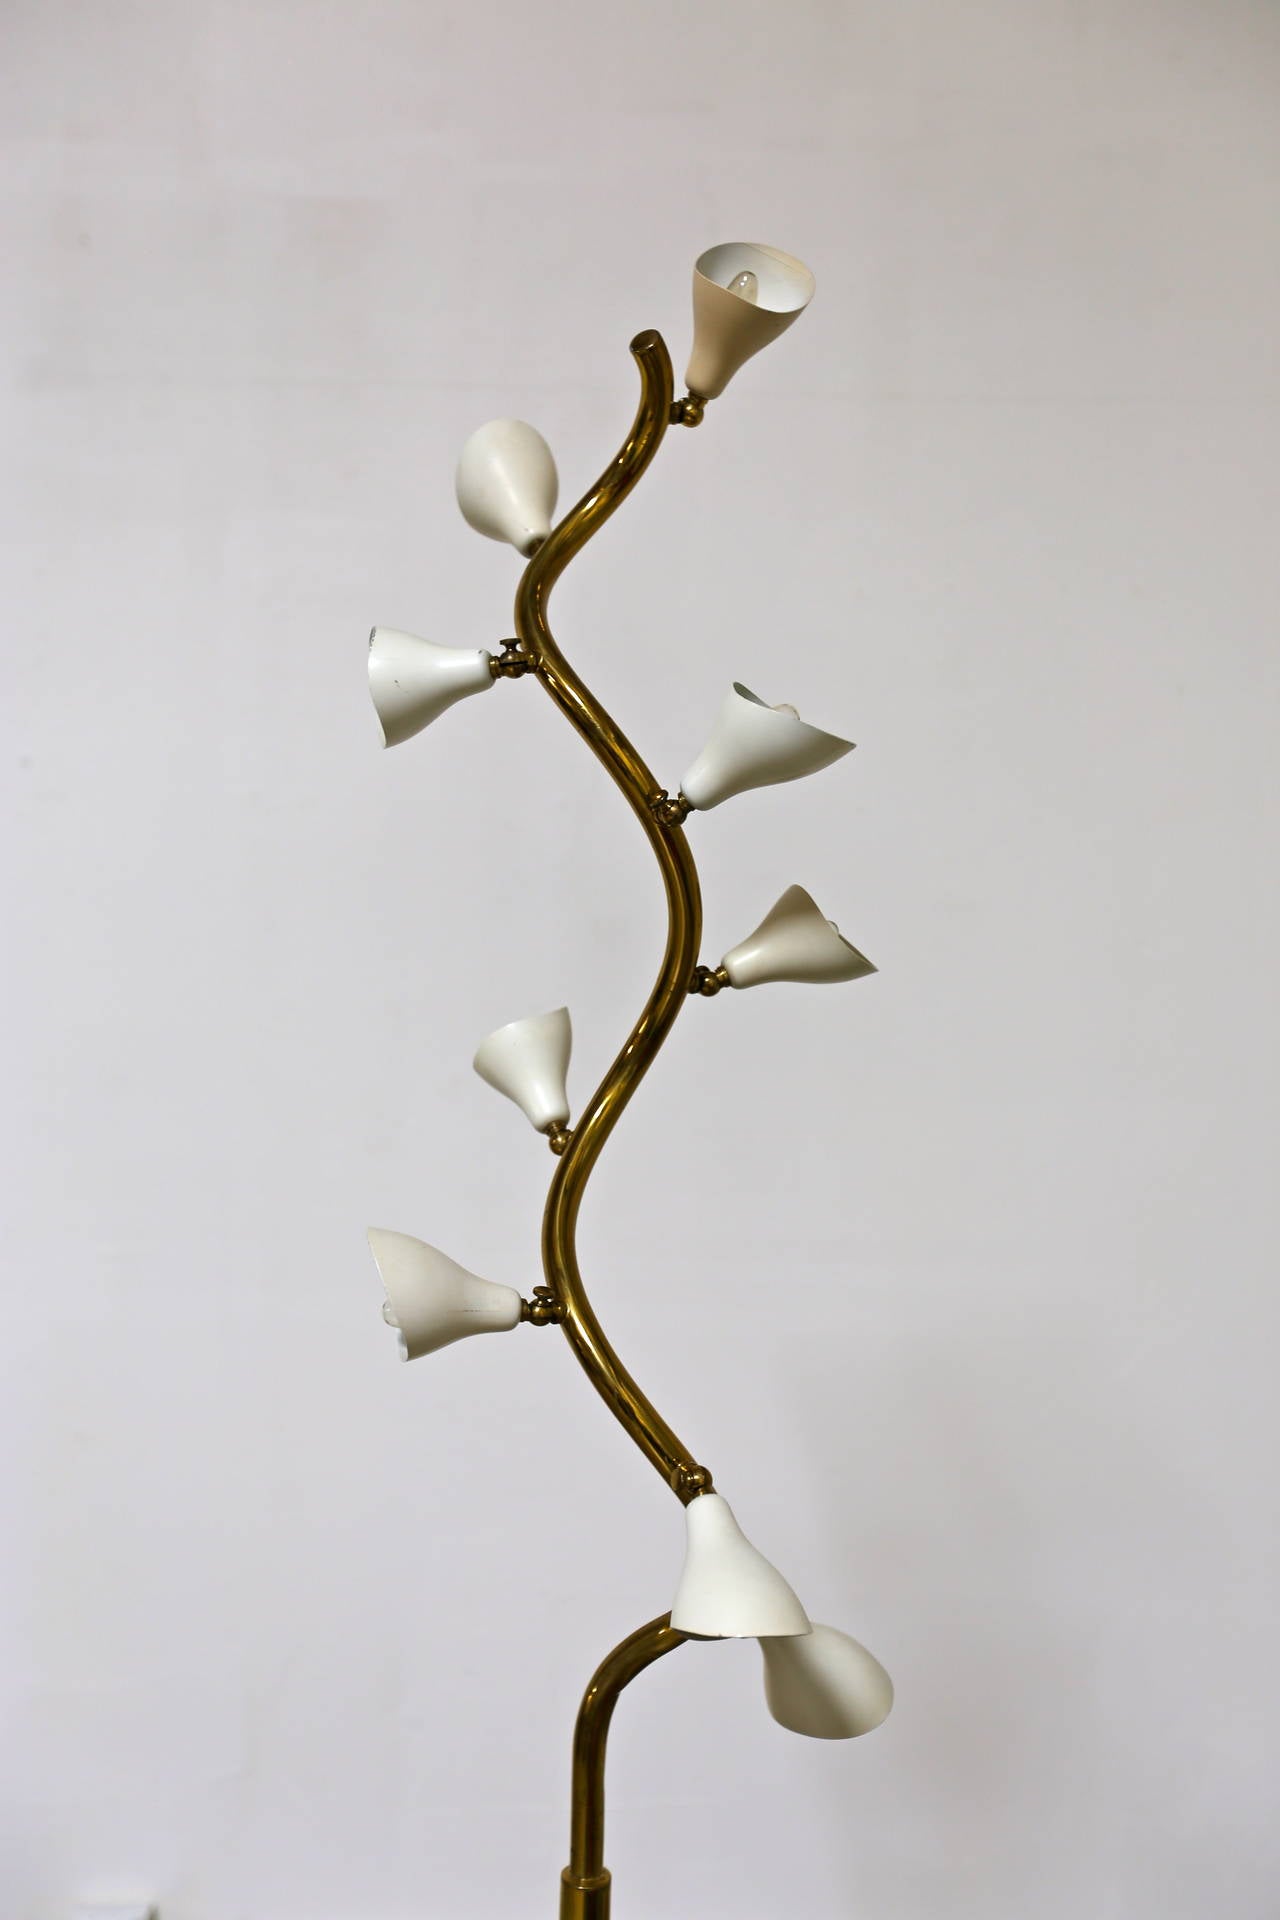 A fine original example of Gino Sarfatti’s floor lamp with nine adjustable shades. Signed Arteluce Made in Italy. The base is marble.